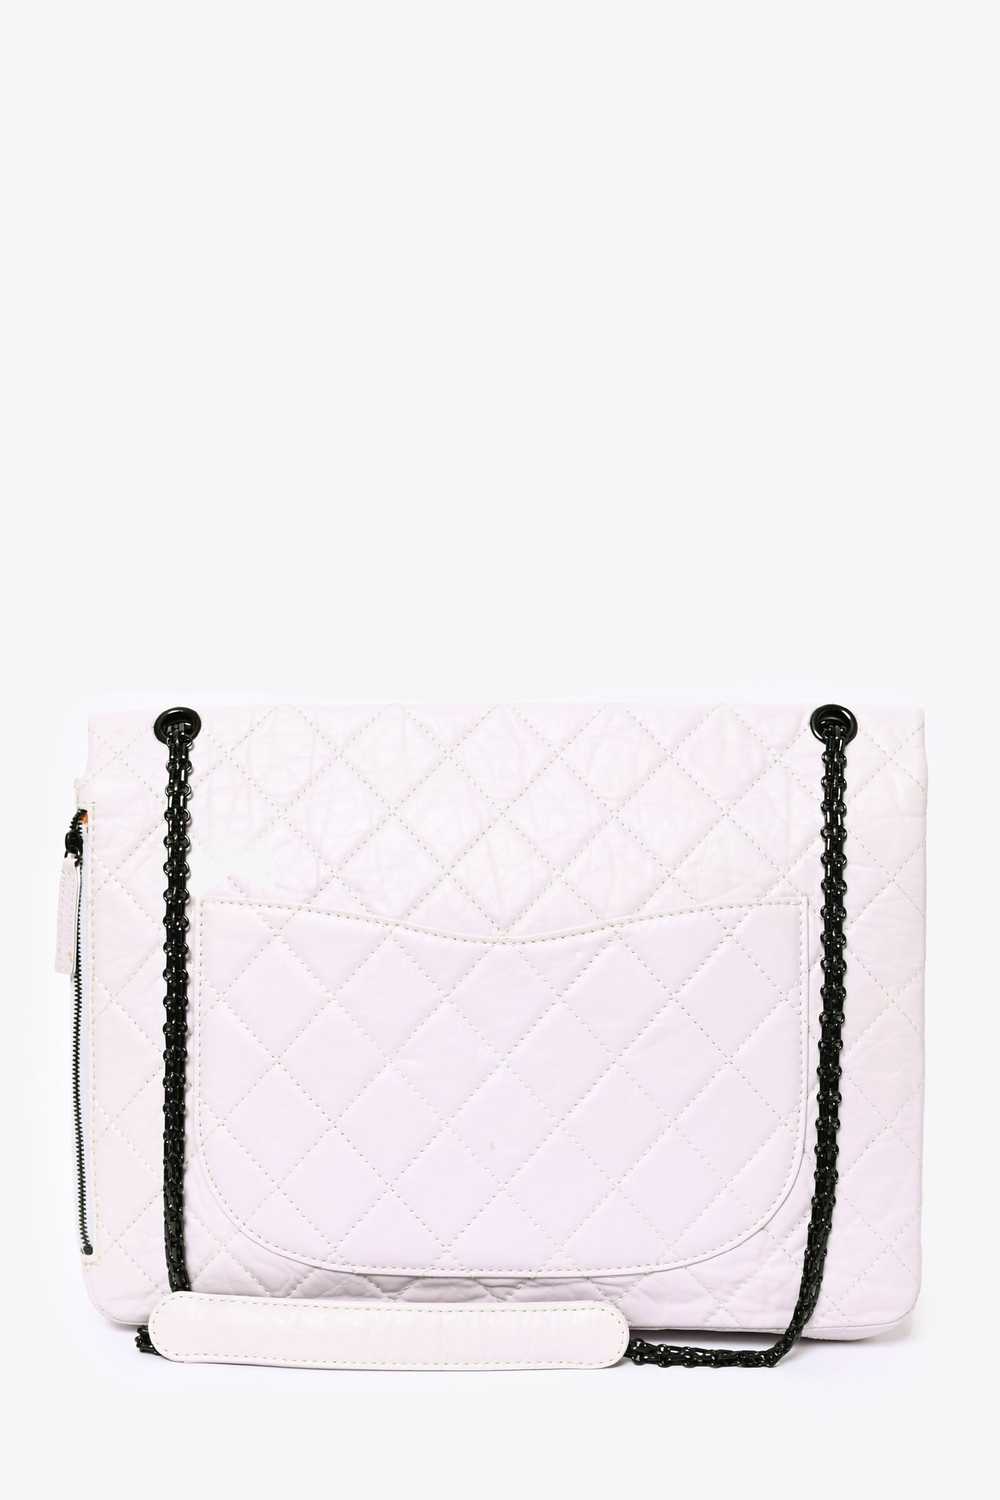 Pre-Loved Chanel™ 2008/9 Grey Leather Quilted 2.5… - image 2